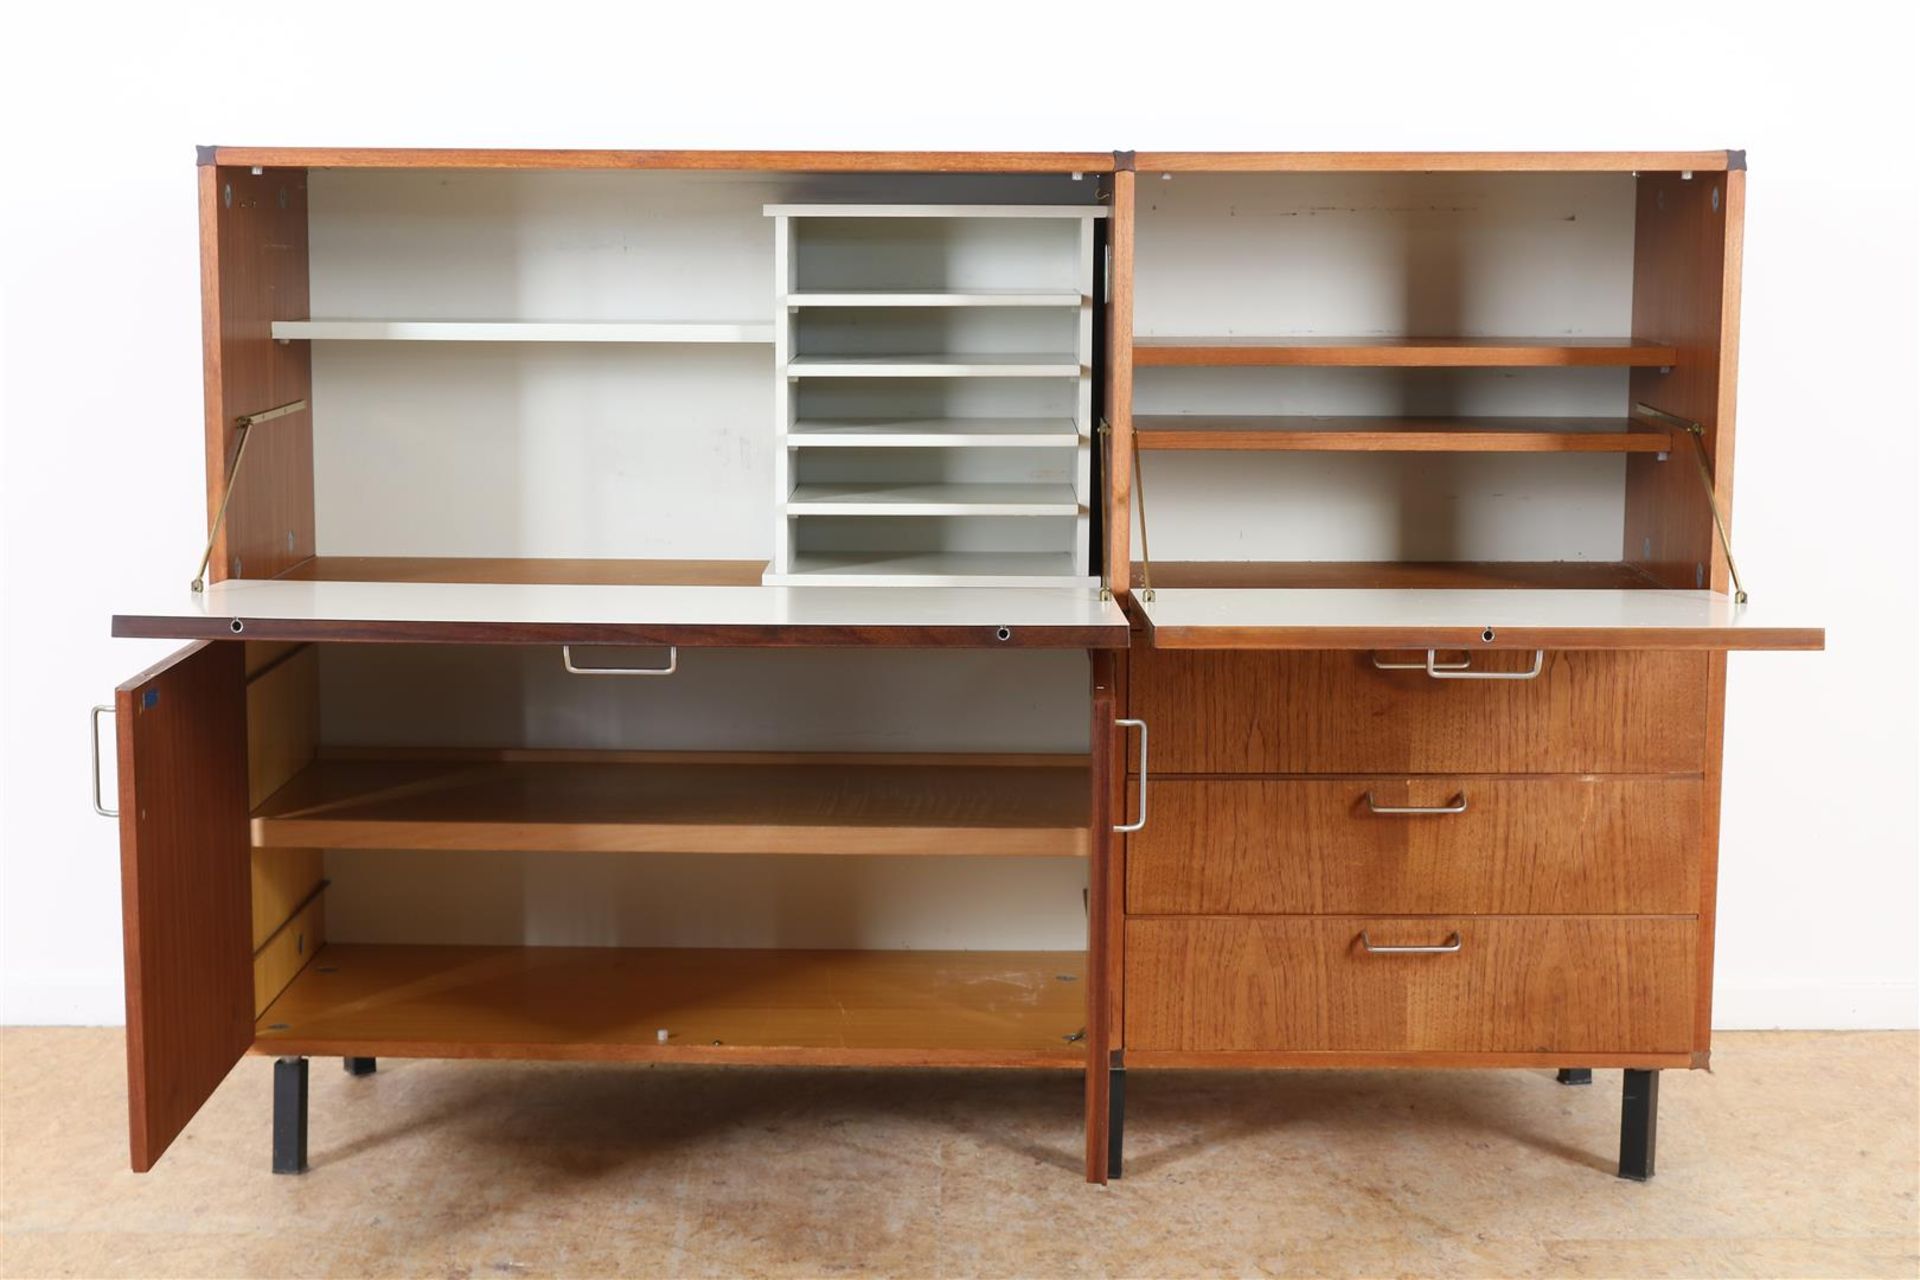 Teak vintage modular wall cupboard with 4 panel doors and 3 drawers, Cees Braakman for Pastoe, - Image 2 of 4